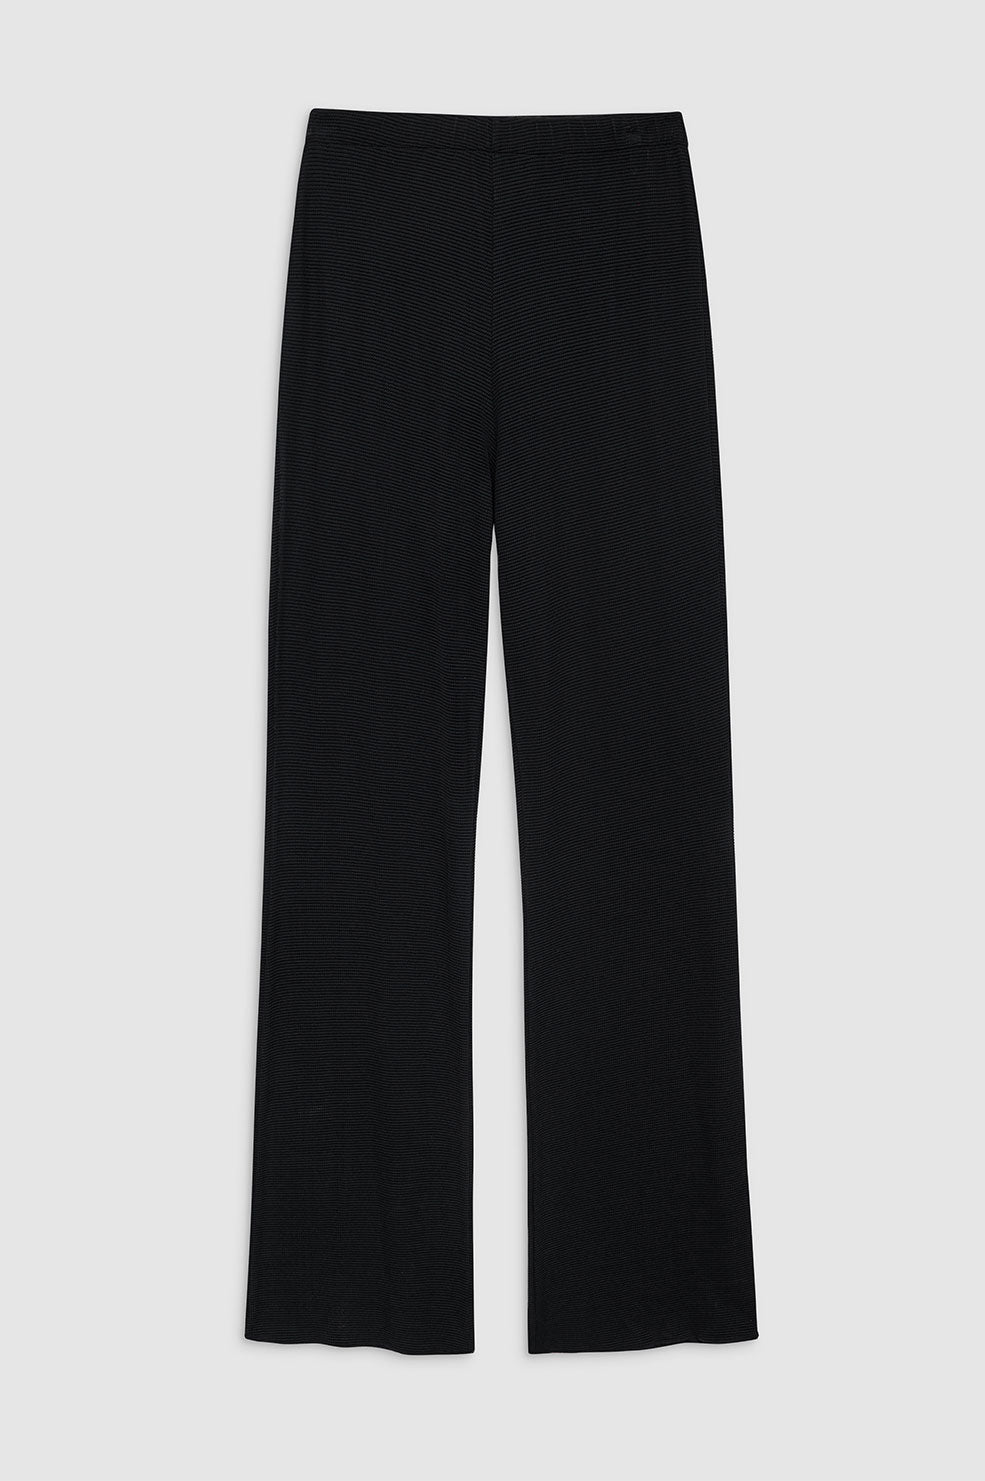 ANINE BING Billie Pant - Black Waffle - Front View